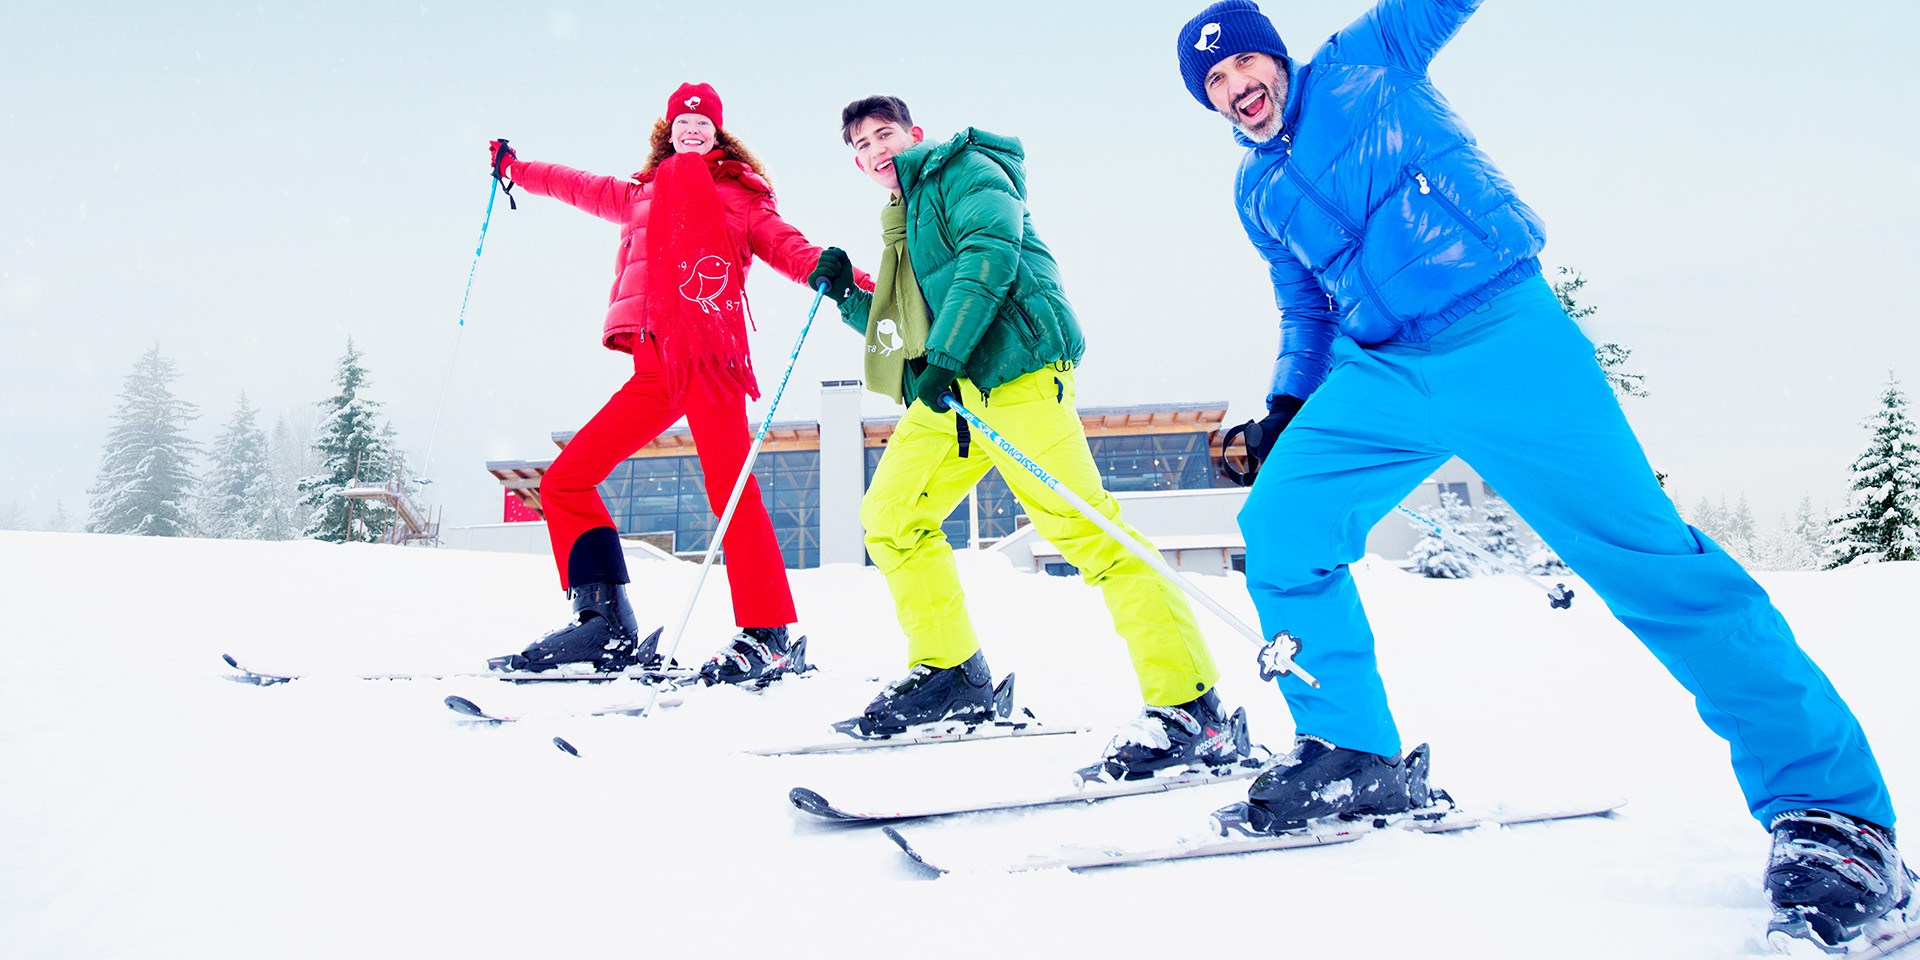 Three skiers in bright colored clothing winter